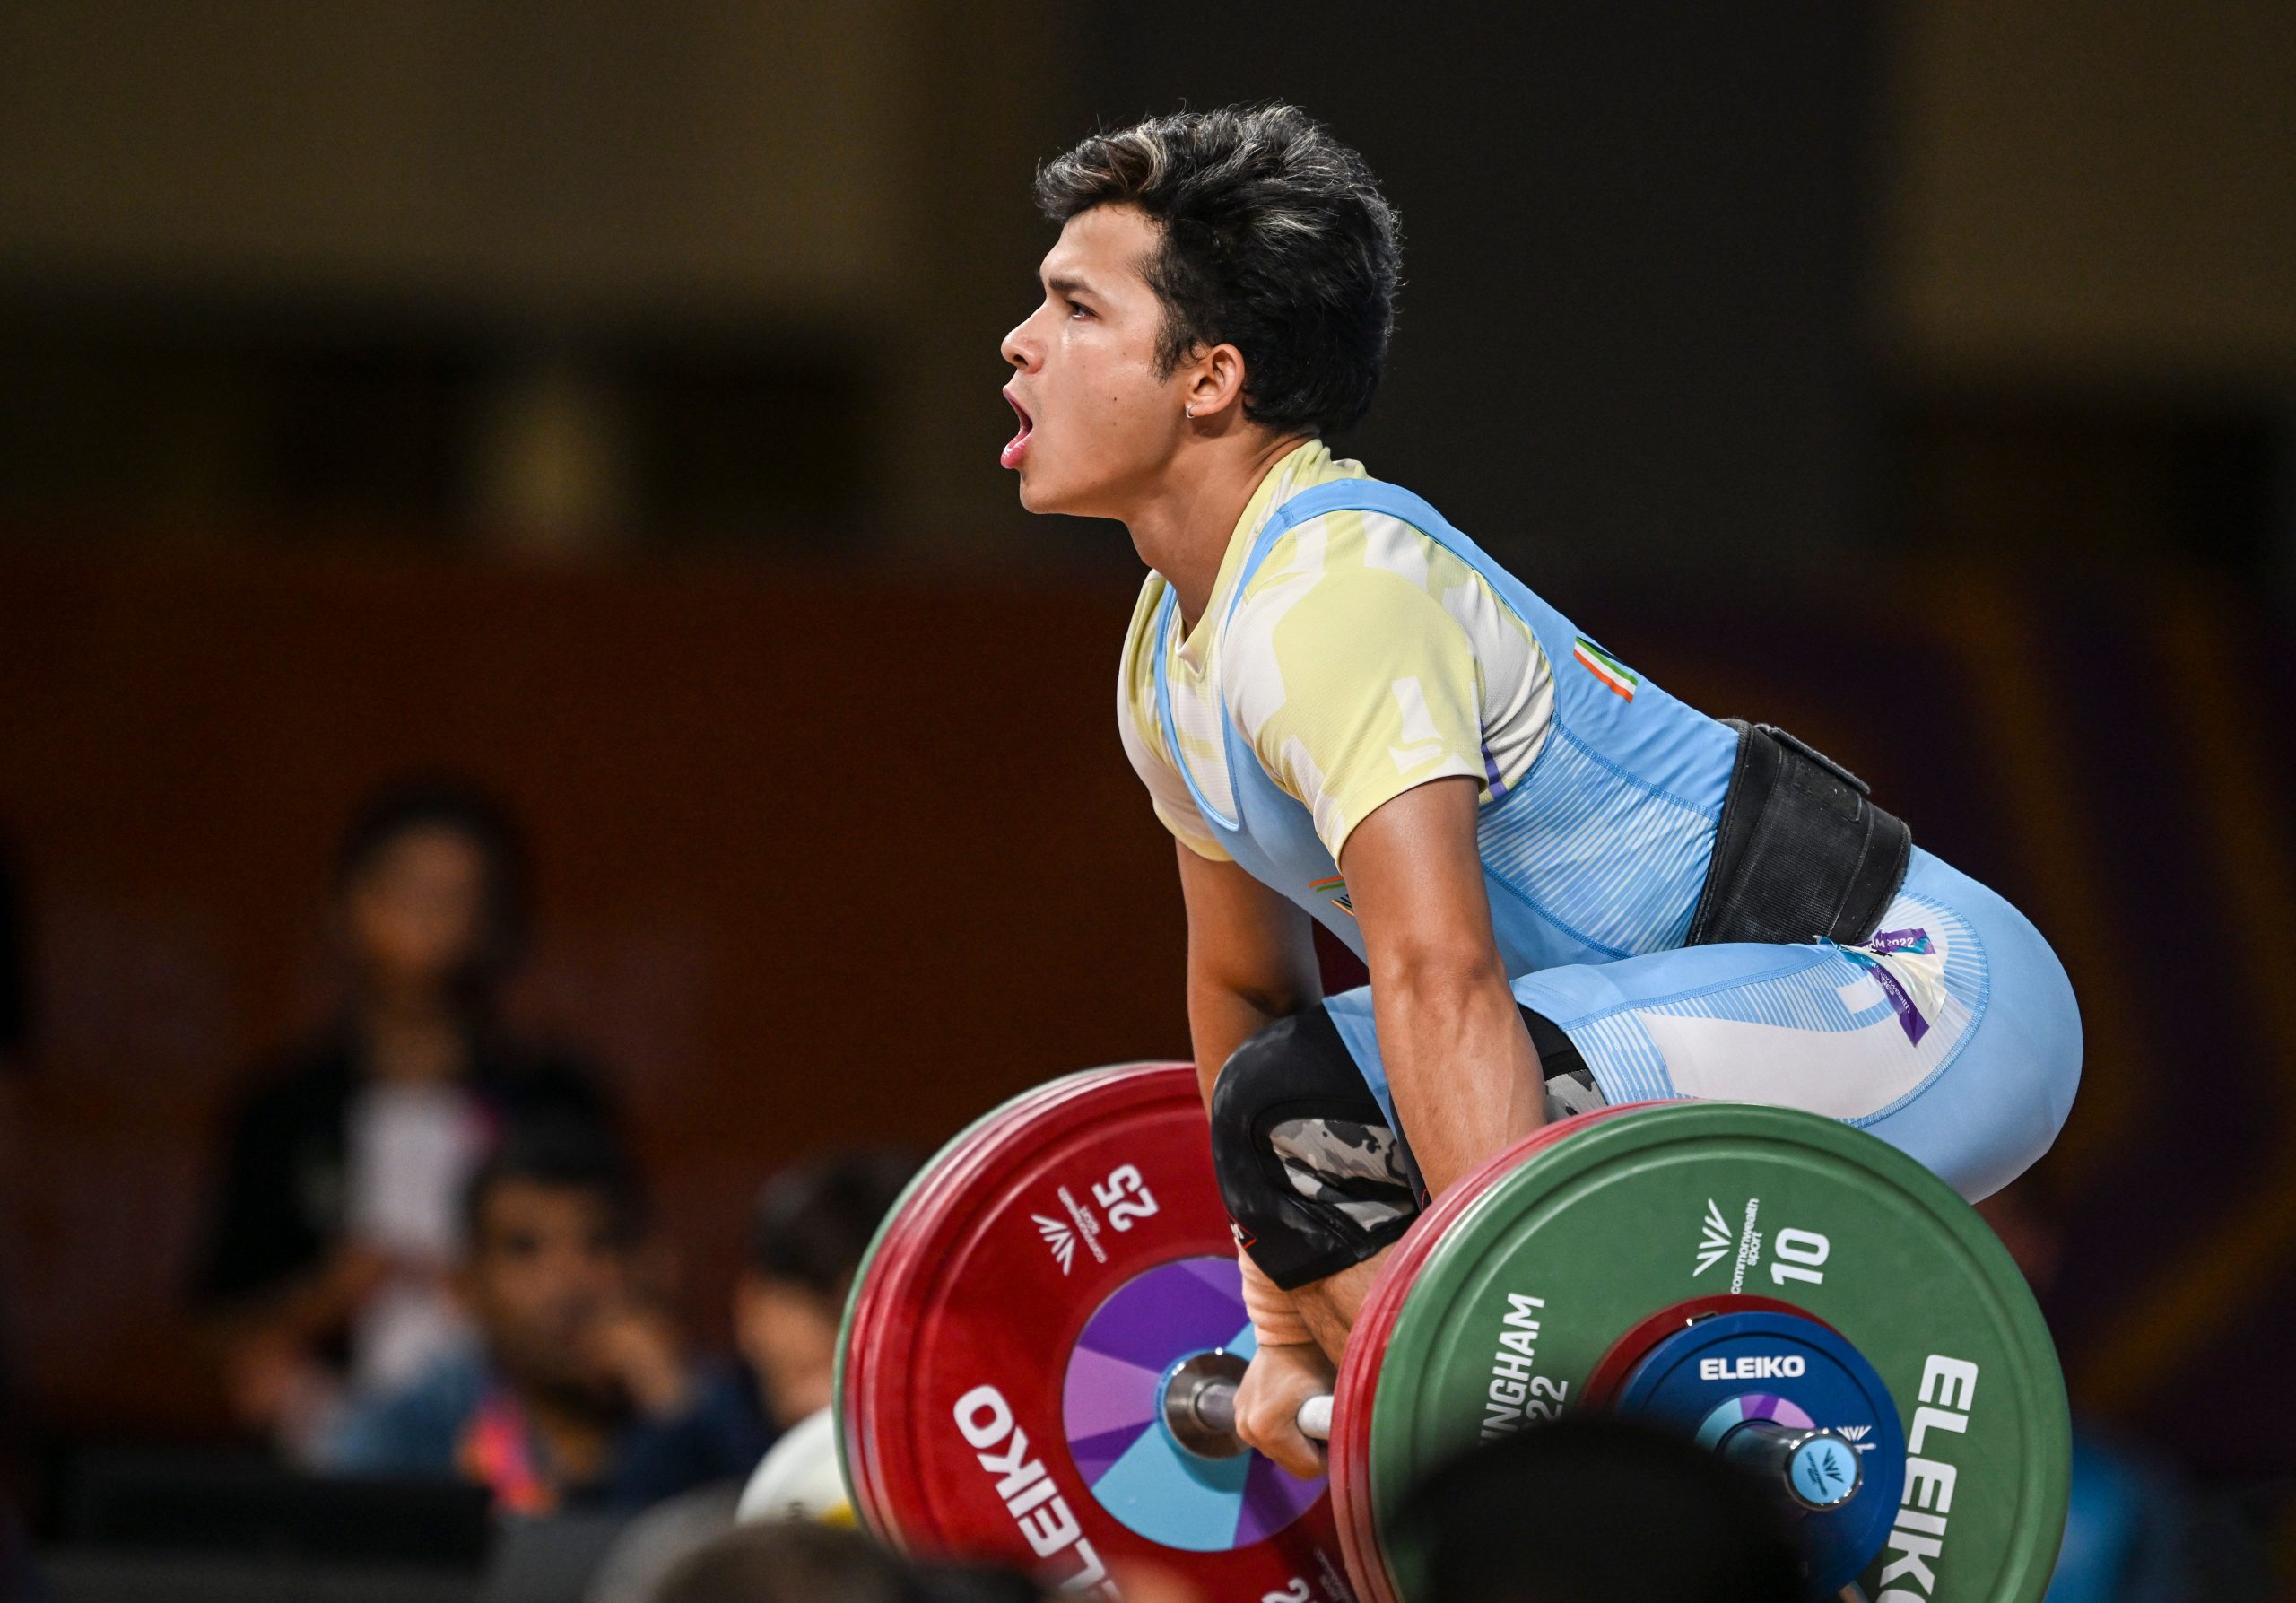 Jeremy ‘happy but not satisfied’ with weightlifting gold at CWG 2022